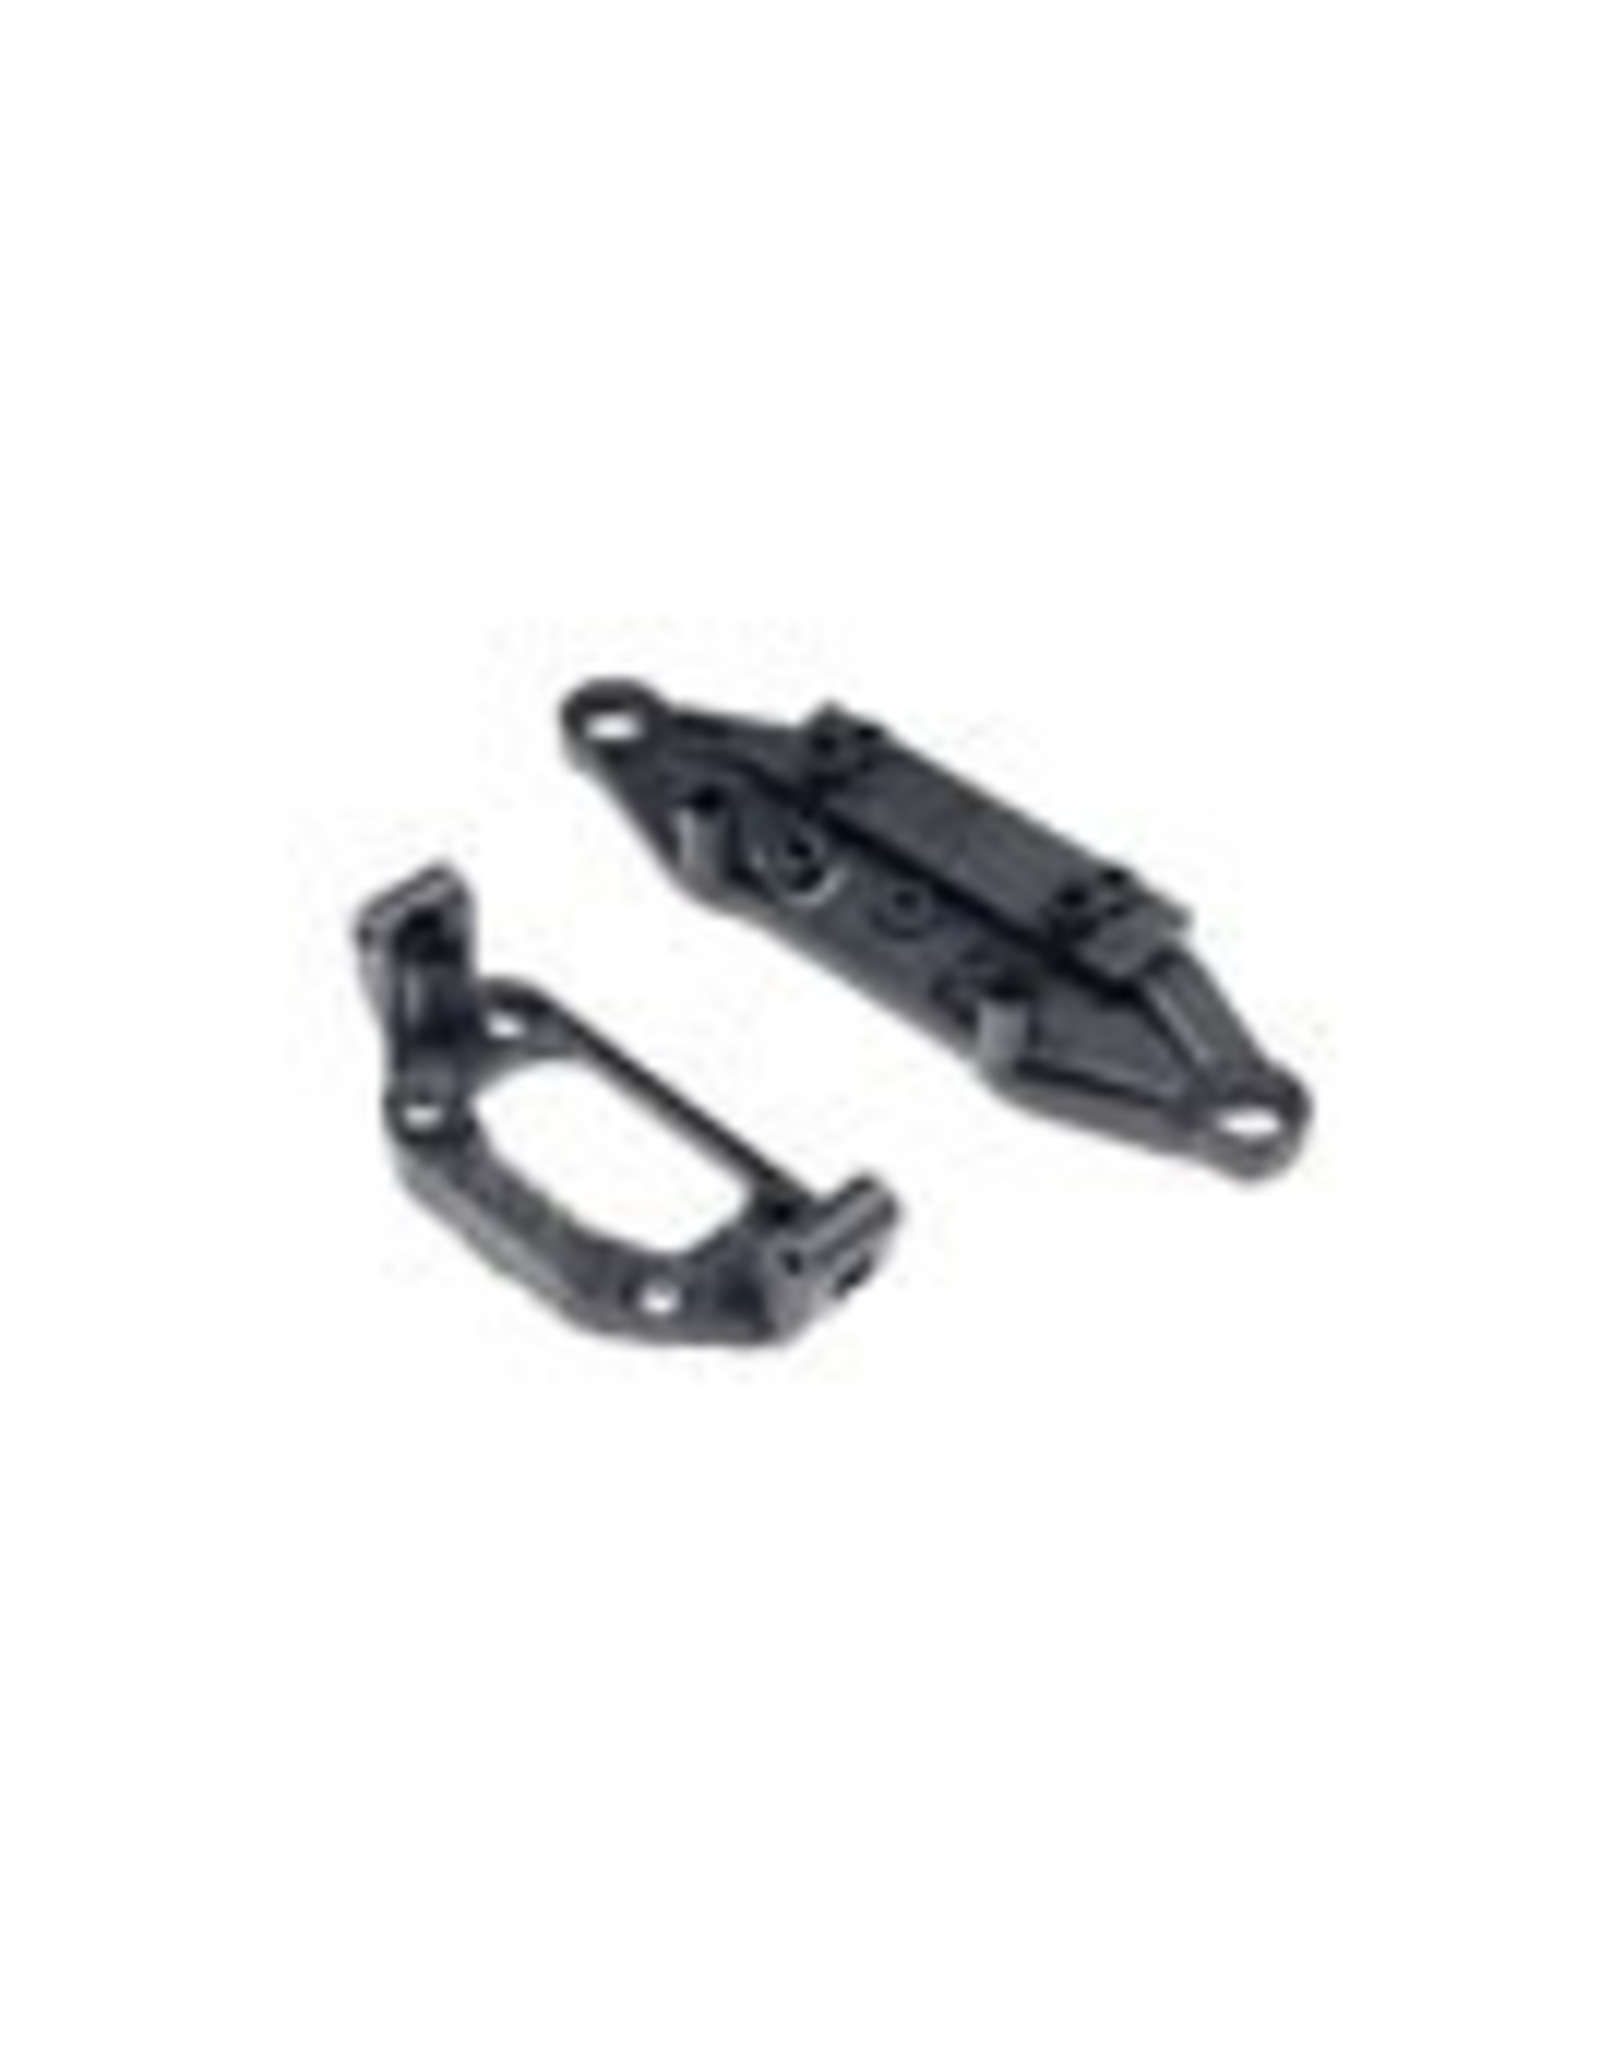 GL Racing GLR Front Bulkhead and Lower Arms (GLR-S010)